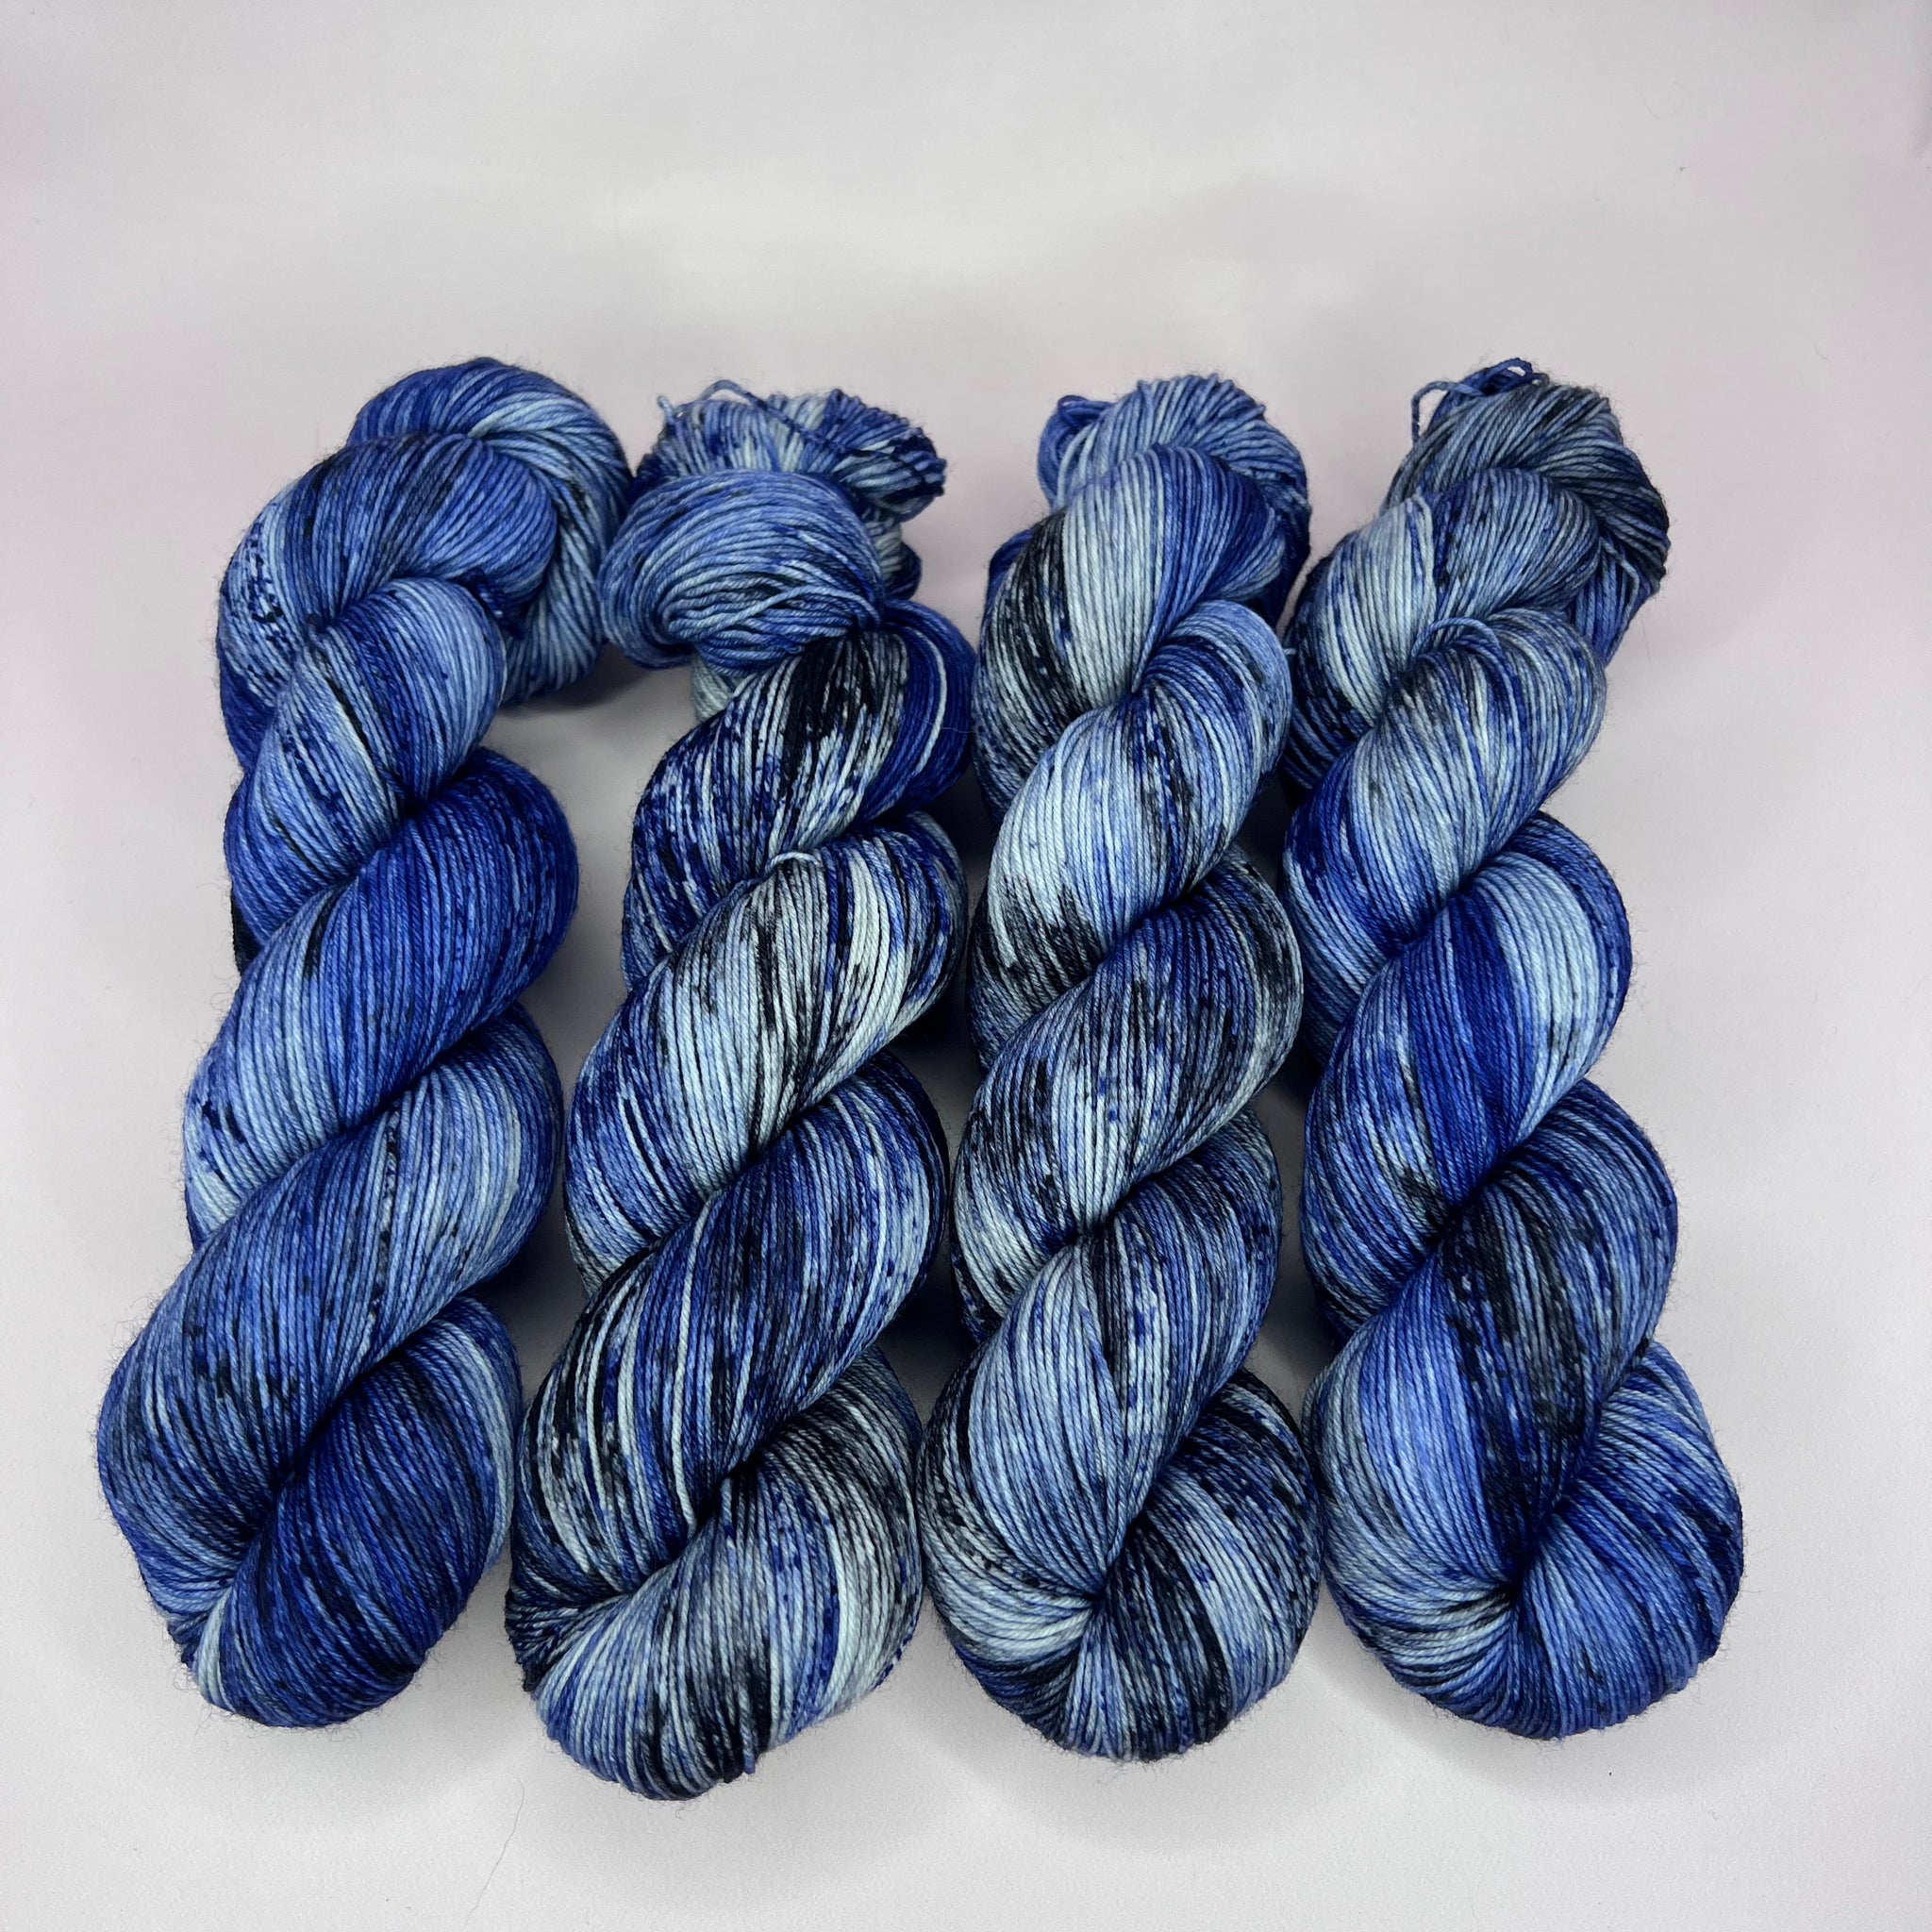 Dyed By Eloise - LOL colorway of the Month- Moonlight B.B.